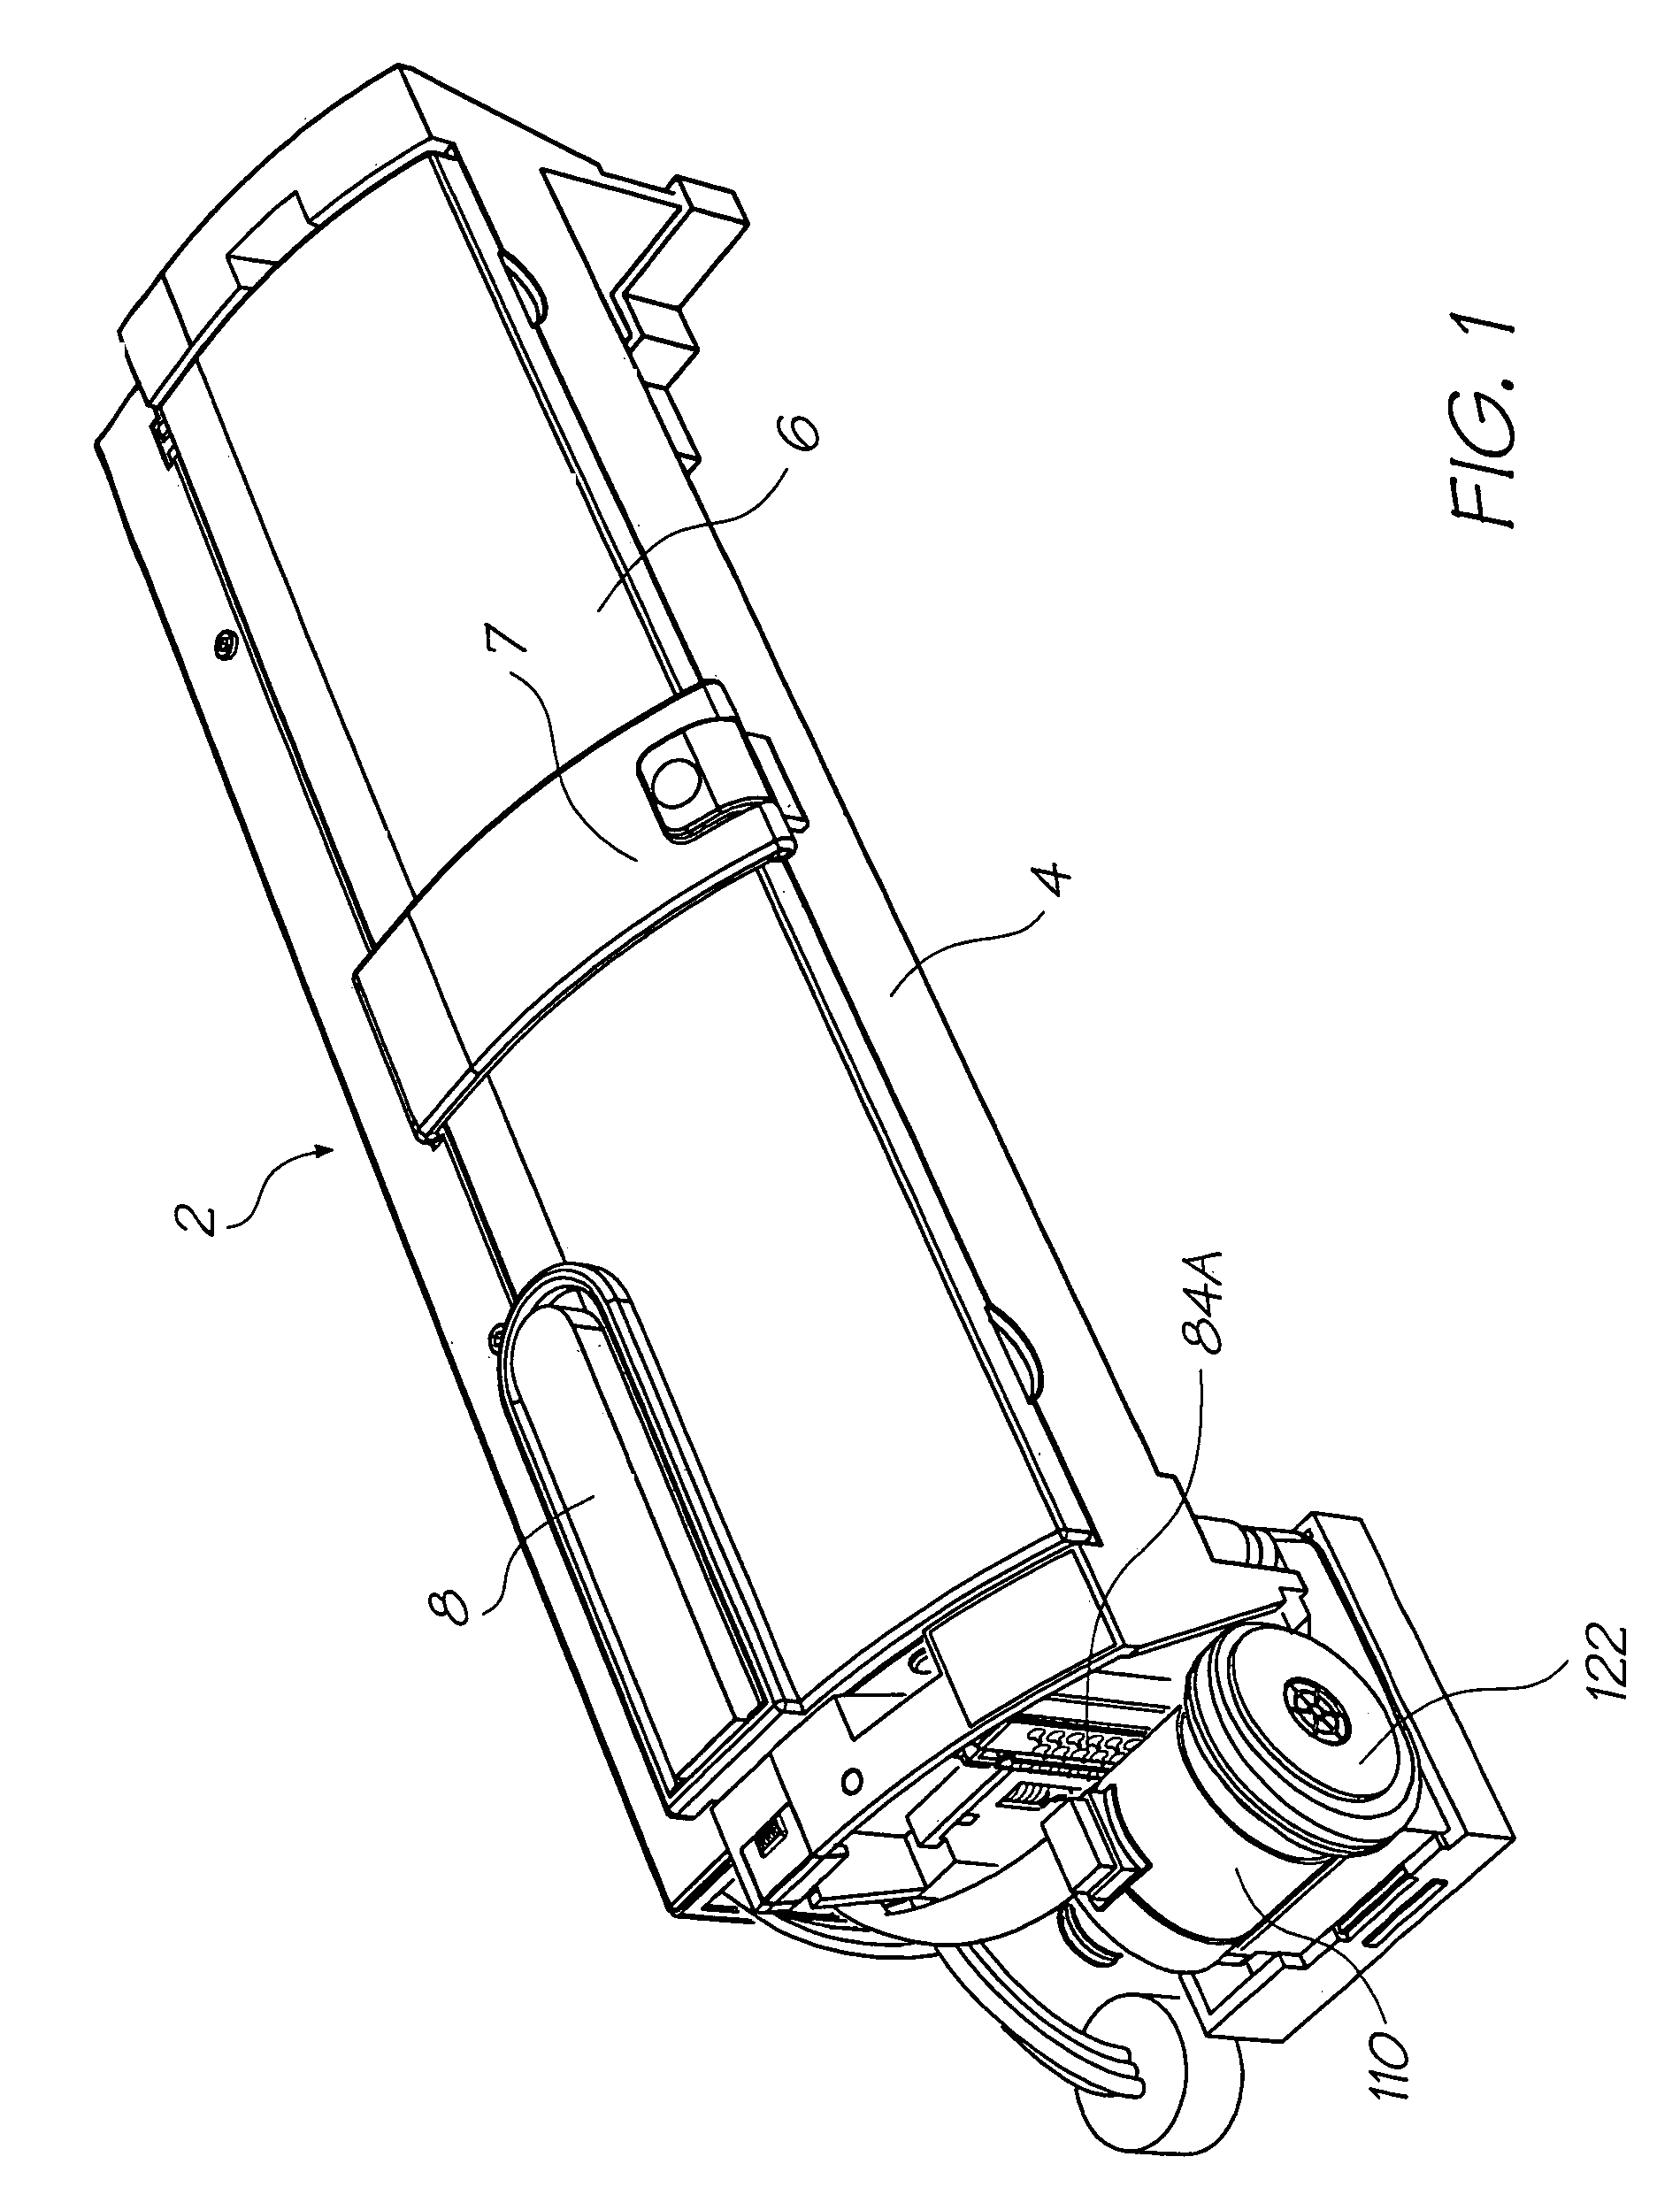 Inkjet printer cartridge with fixative delivery capabilities